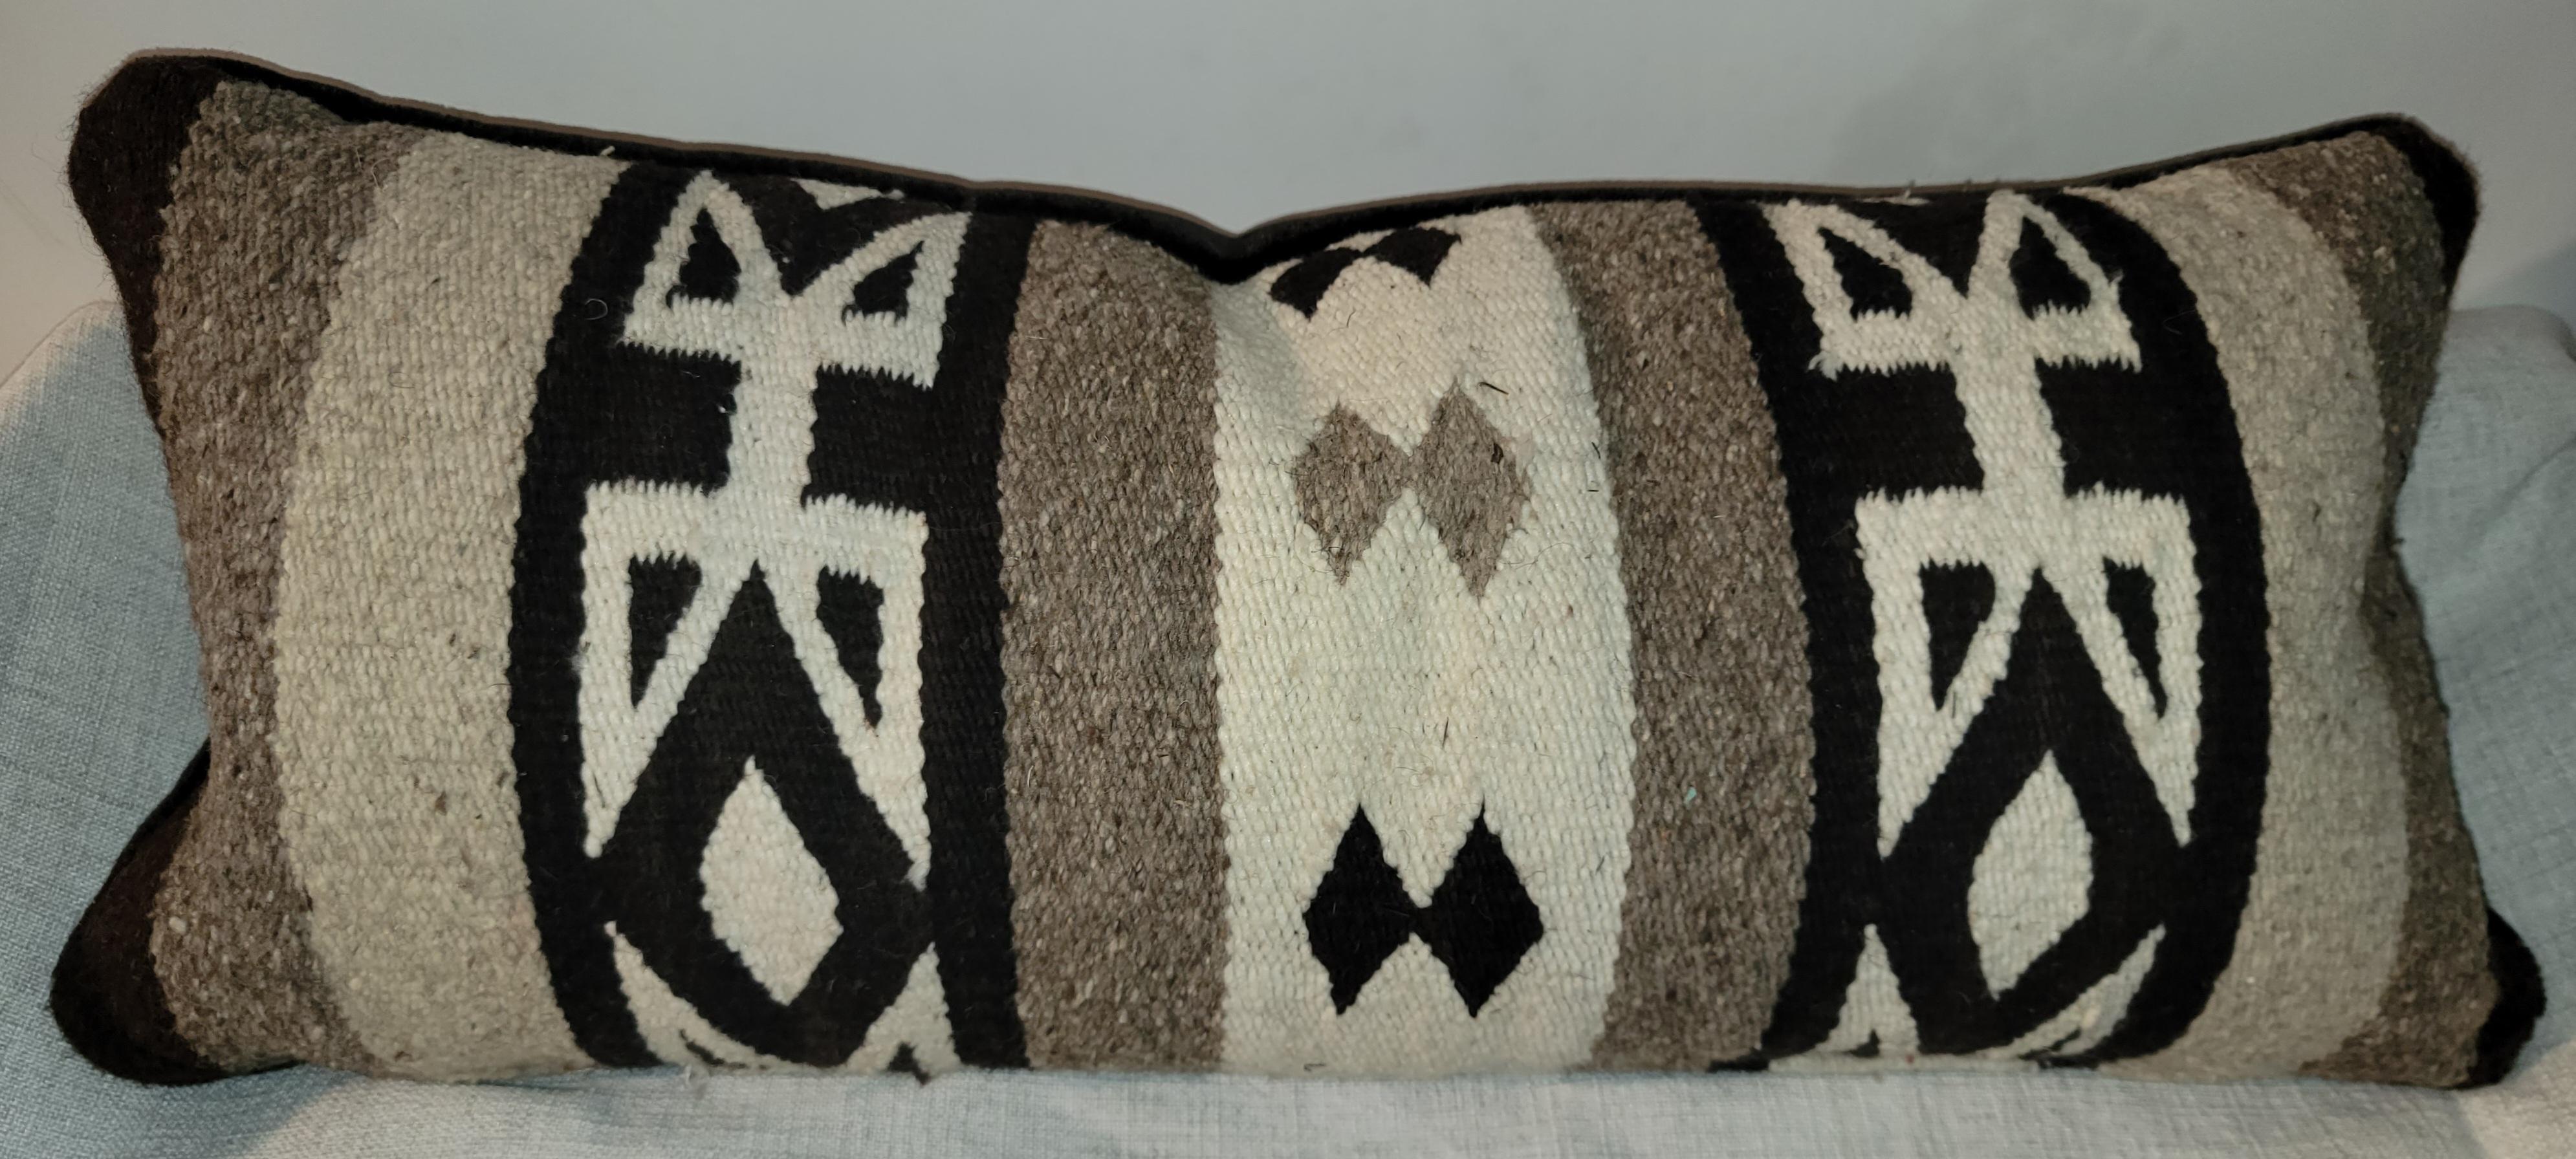 Pair of Indian weaving bolster pillows. Blacking backing. Feather and down inserts and zippered casing.